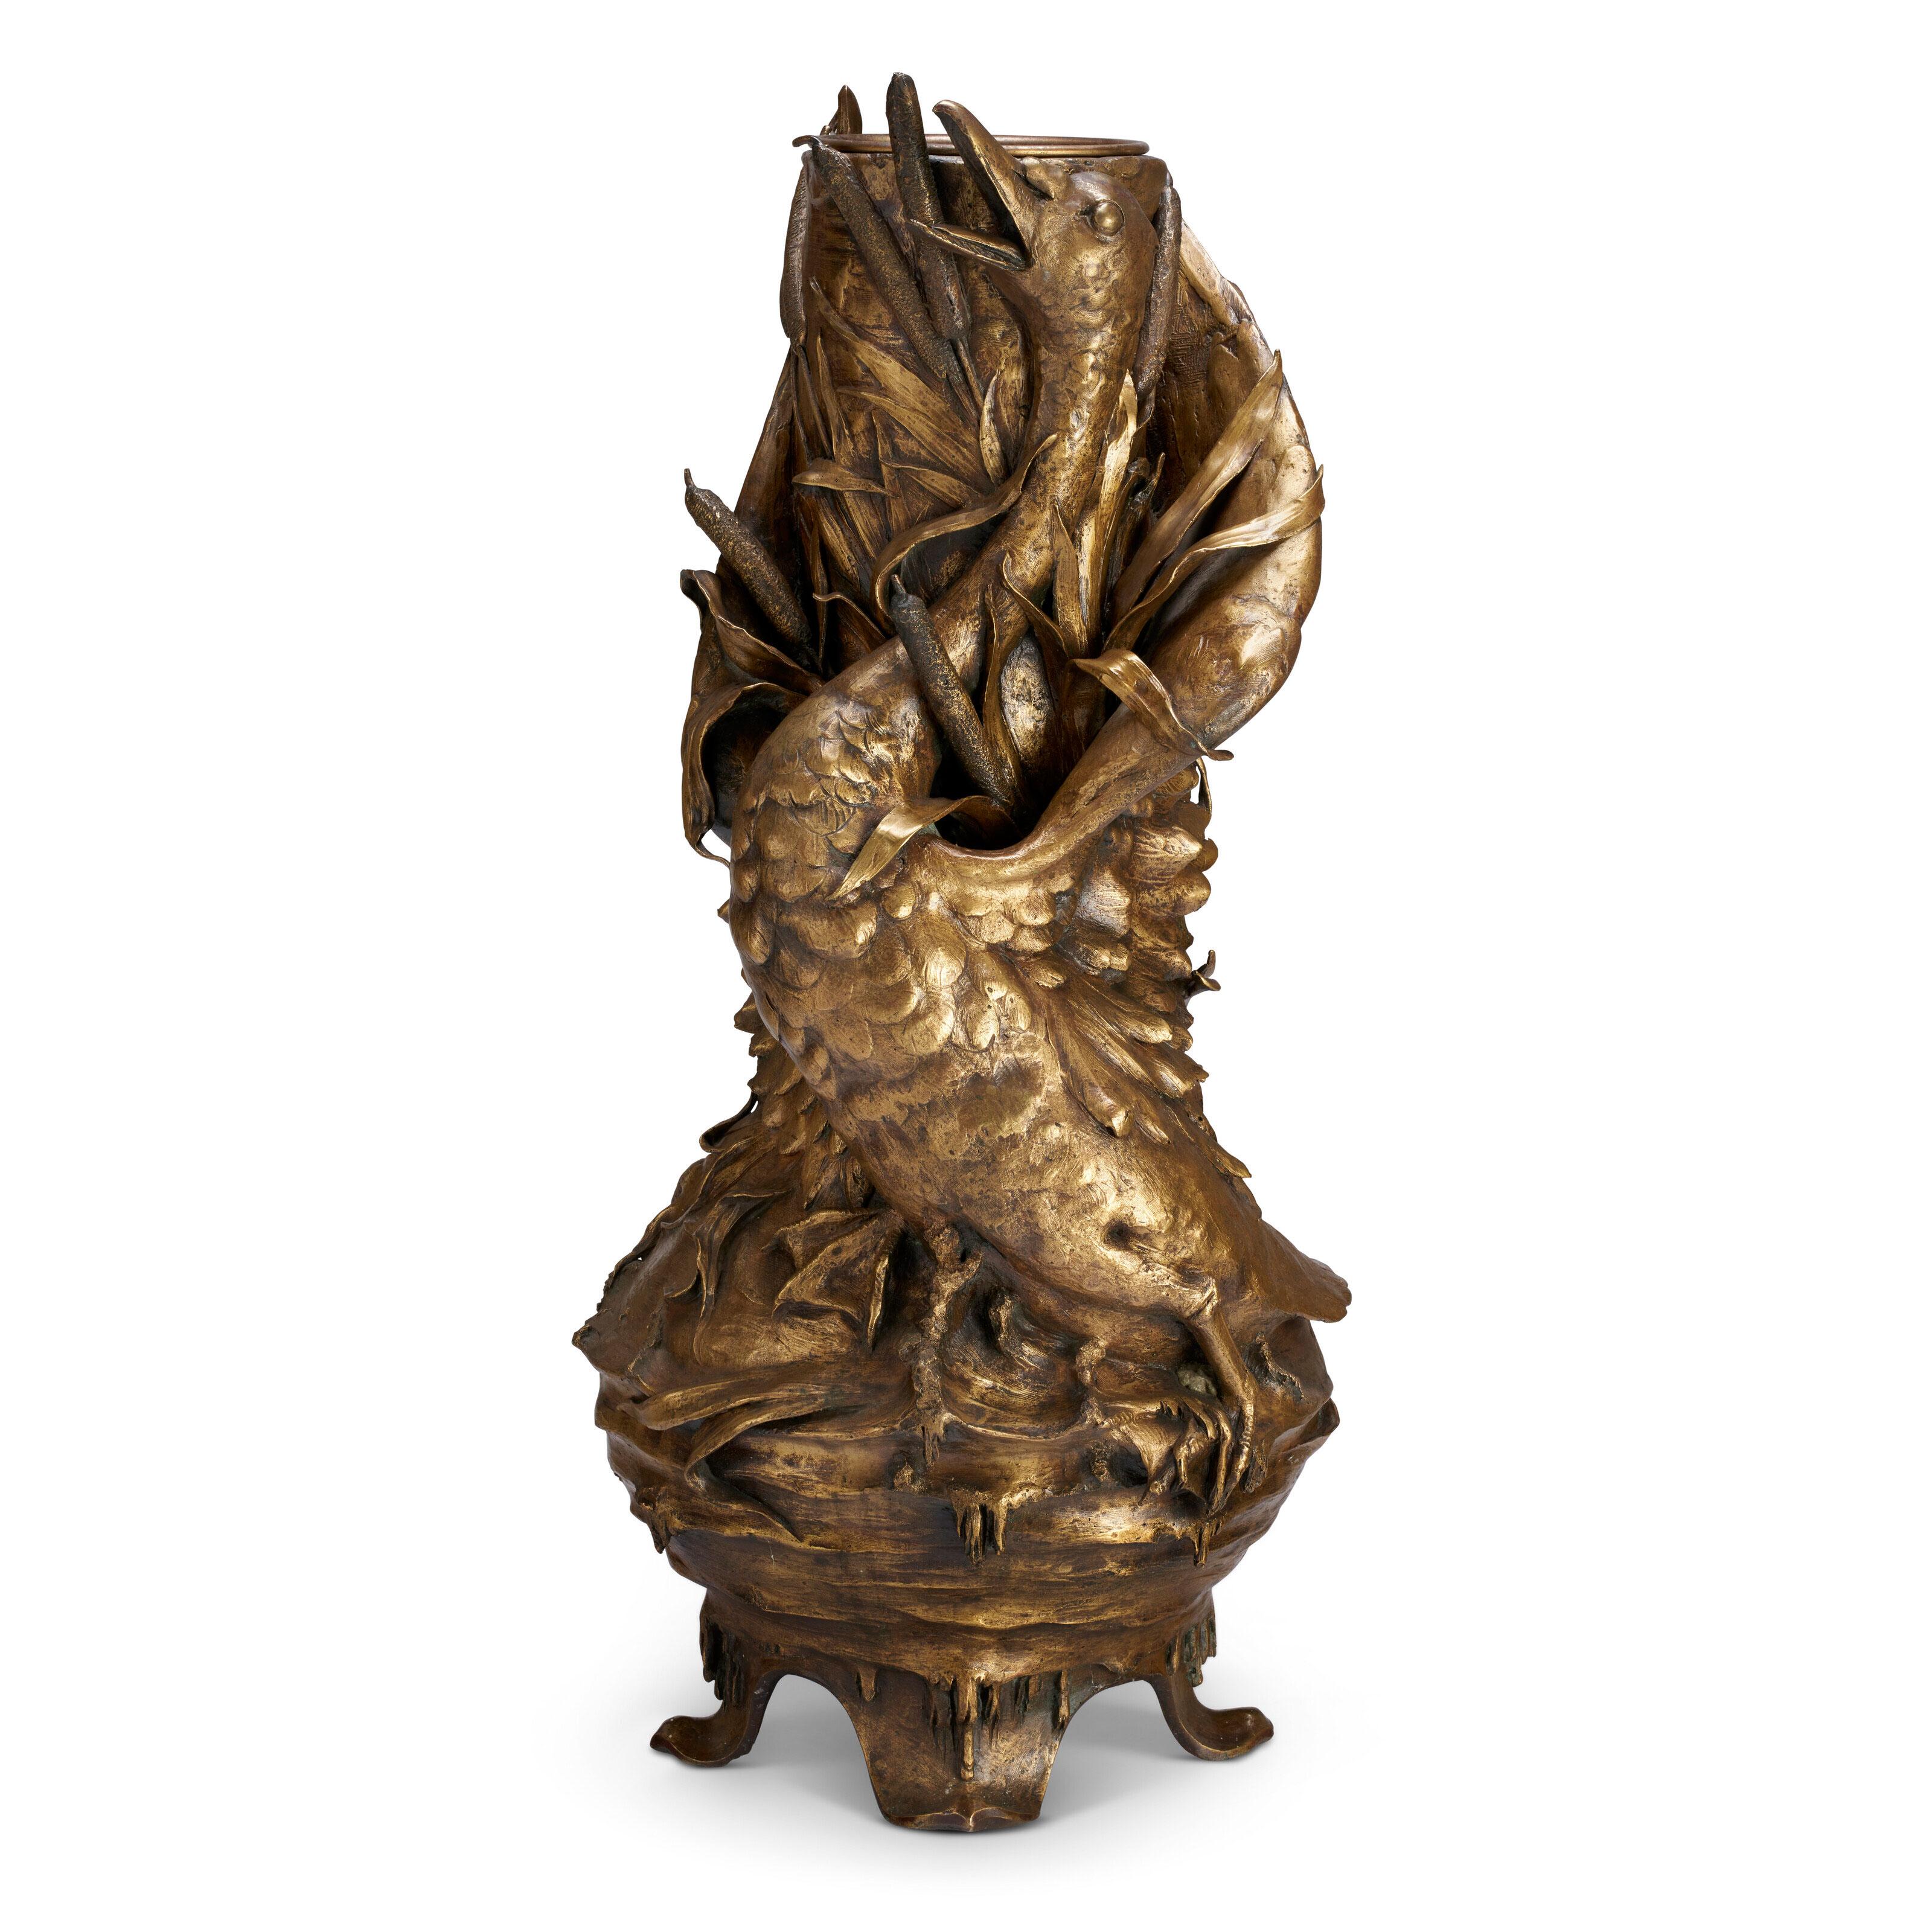 A unique gilt bronze swan vase by Jean-Baptiste Sloodts.

Artist: Jean-Baptiste Sloodts (b.1843, Belgian)
Date: late 19th century
Medium: Gilt bronze
Signature: Signed to body JB'te Sloodts; Inscribed Cie des Bronzes / Bruxelles / fonte a cire